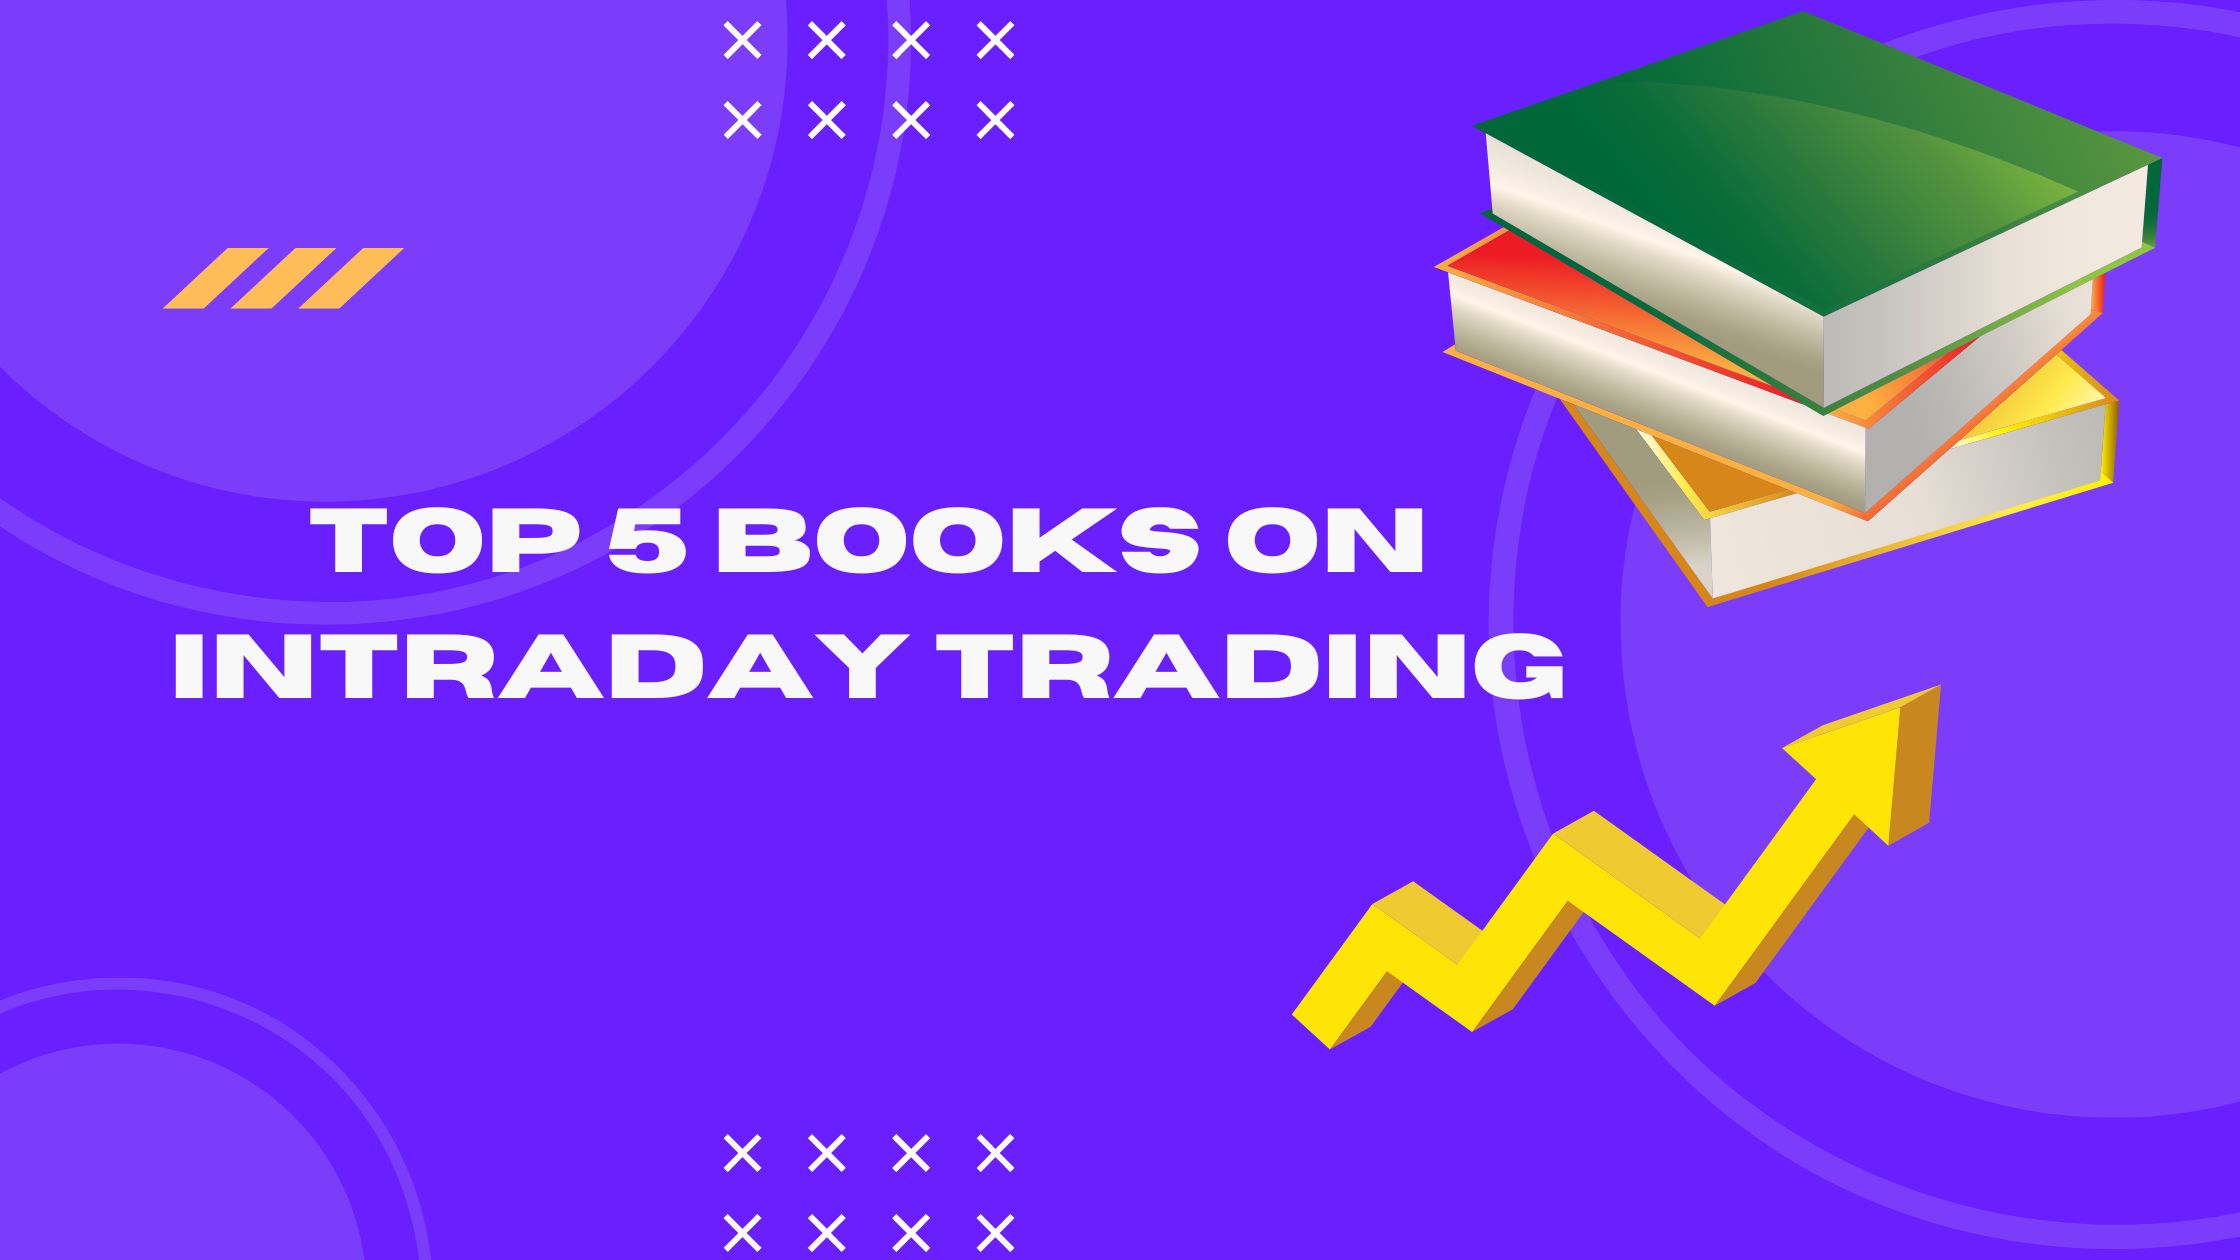 Top 5 Books on Intraday Trading